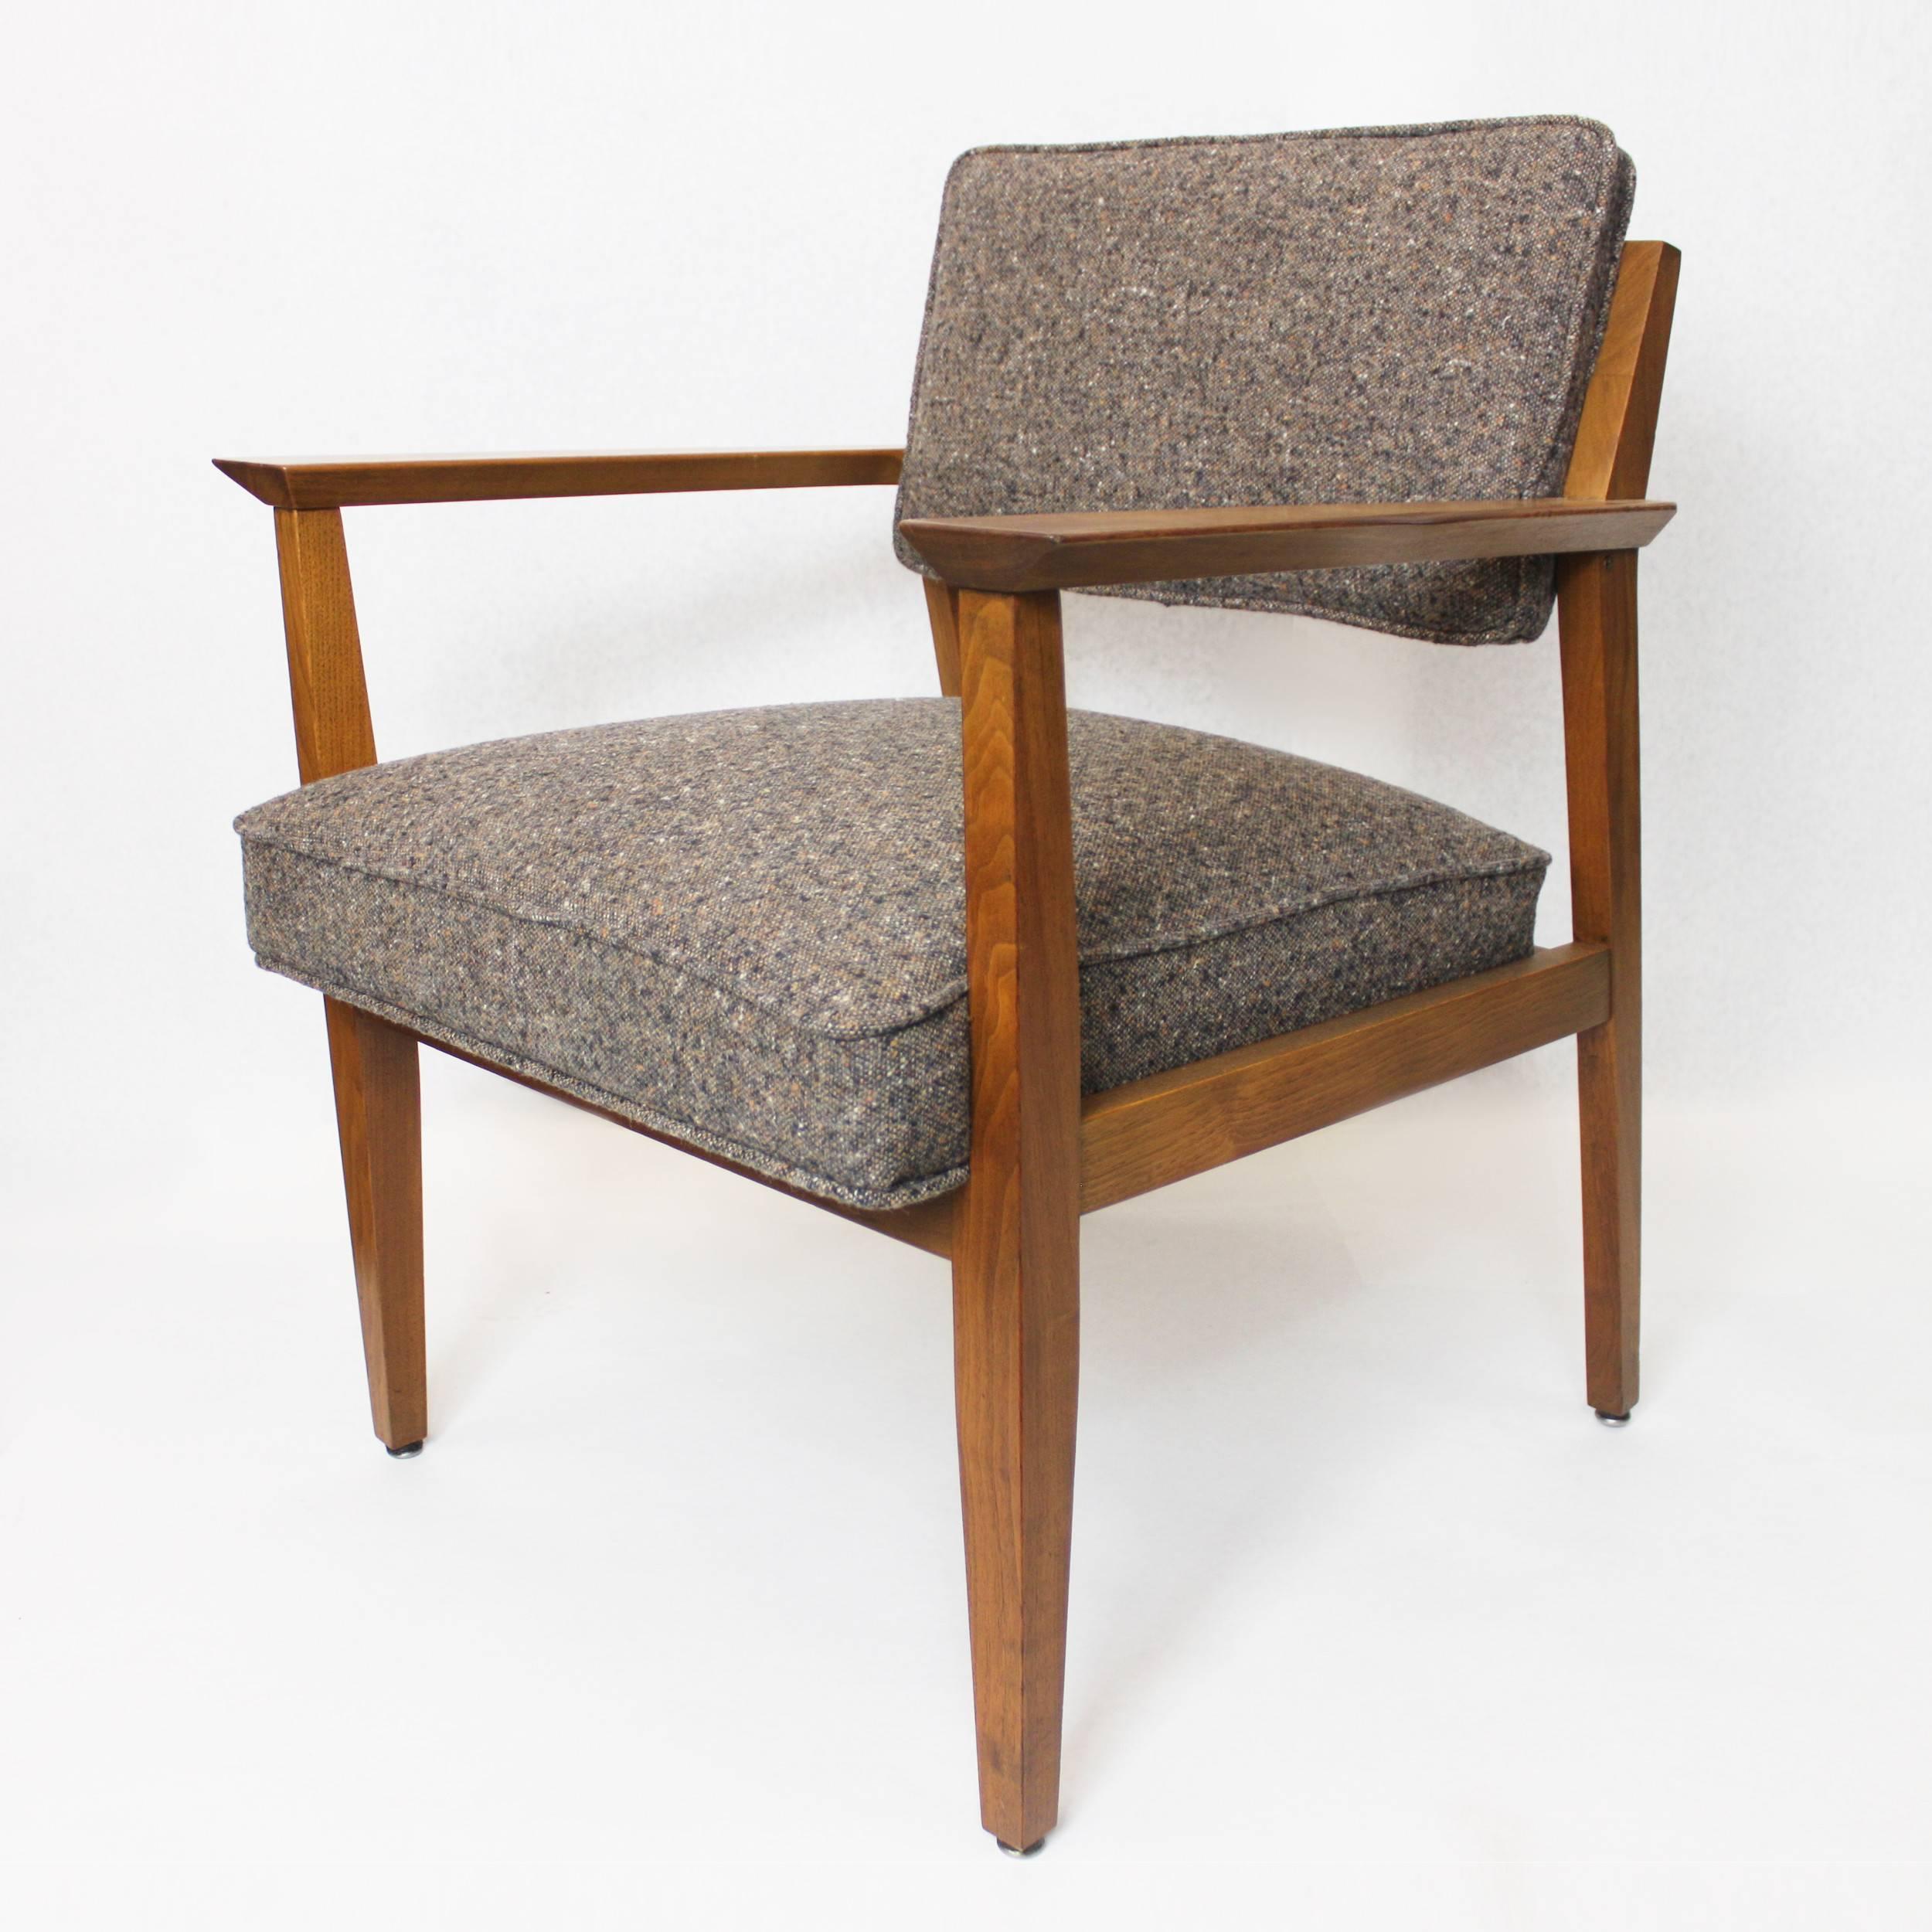 American Fantastic Pair of Mid-Century Modern Walnut Lounge Chairs by Stow Davis